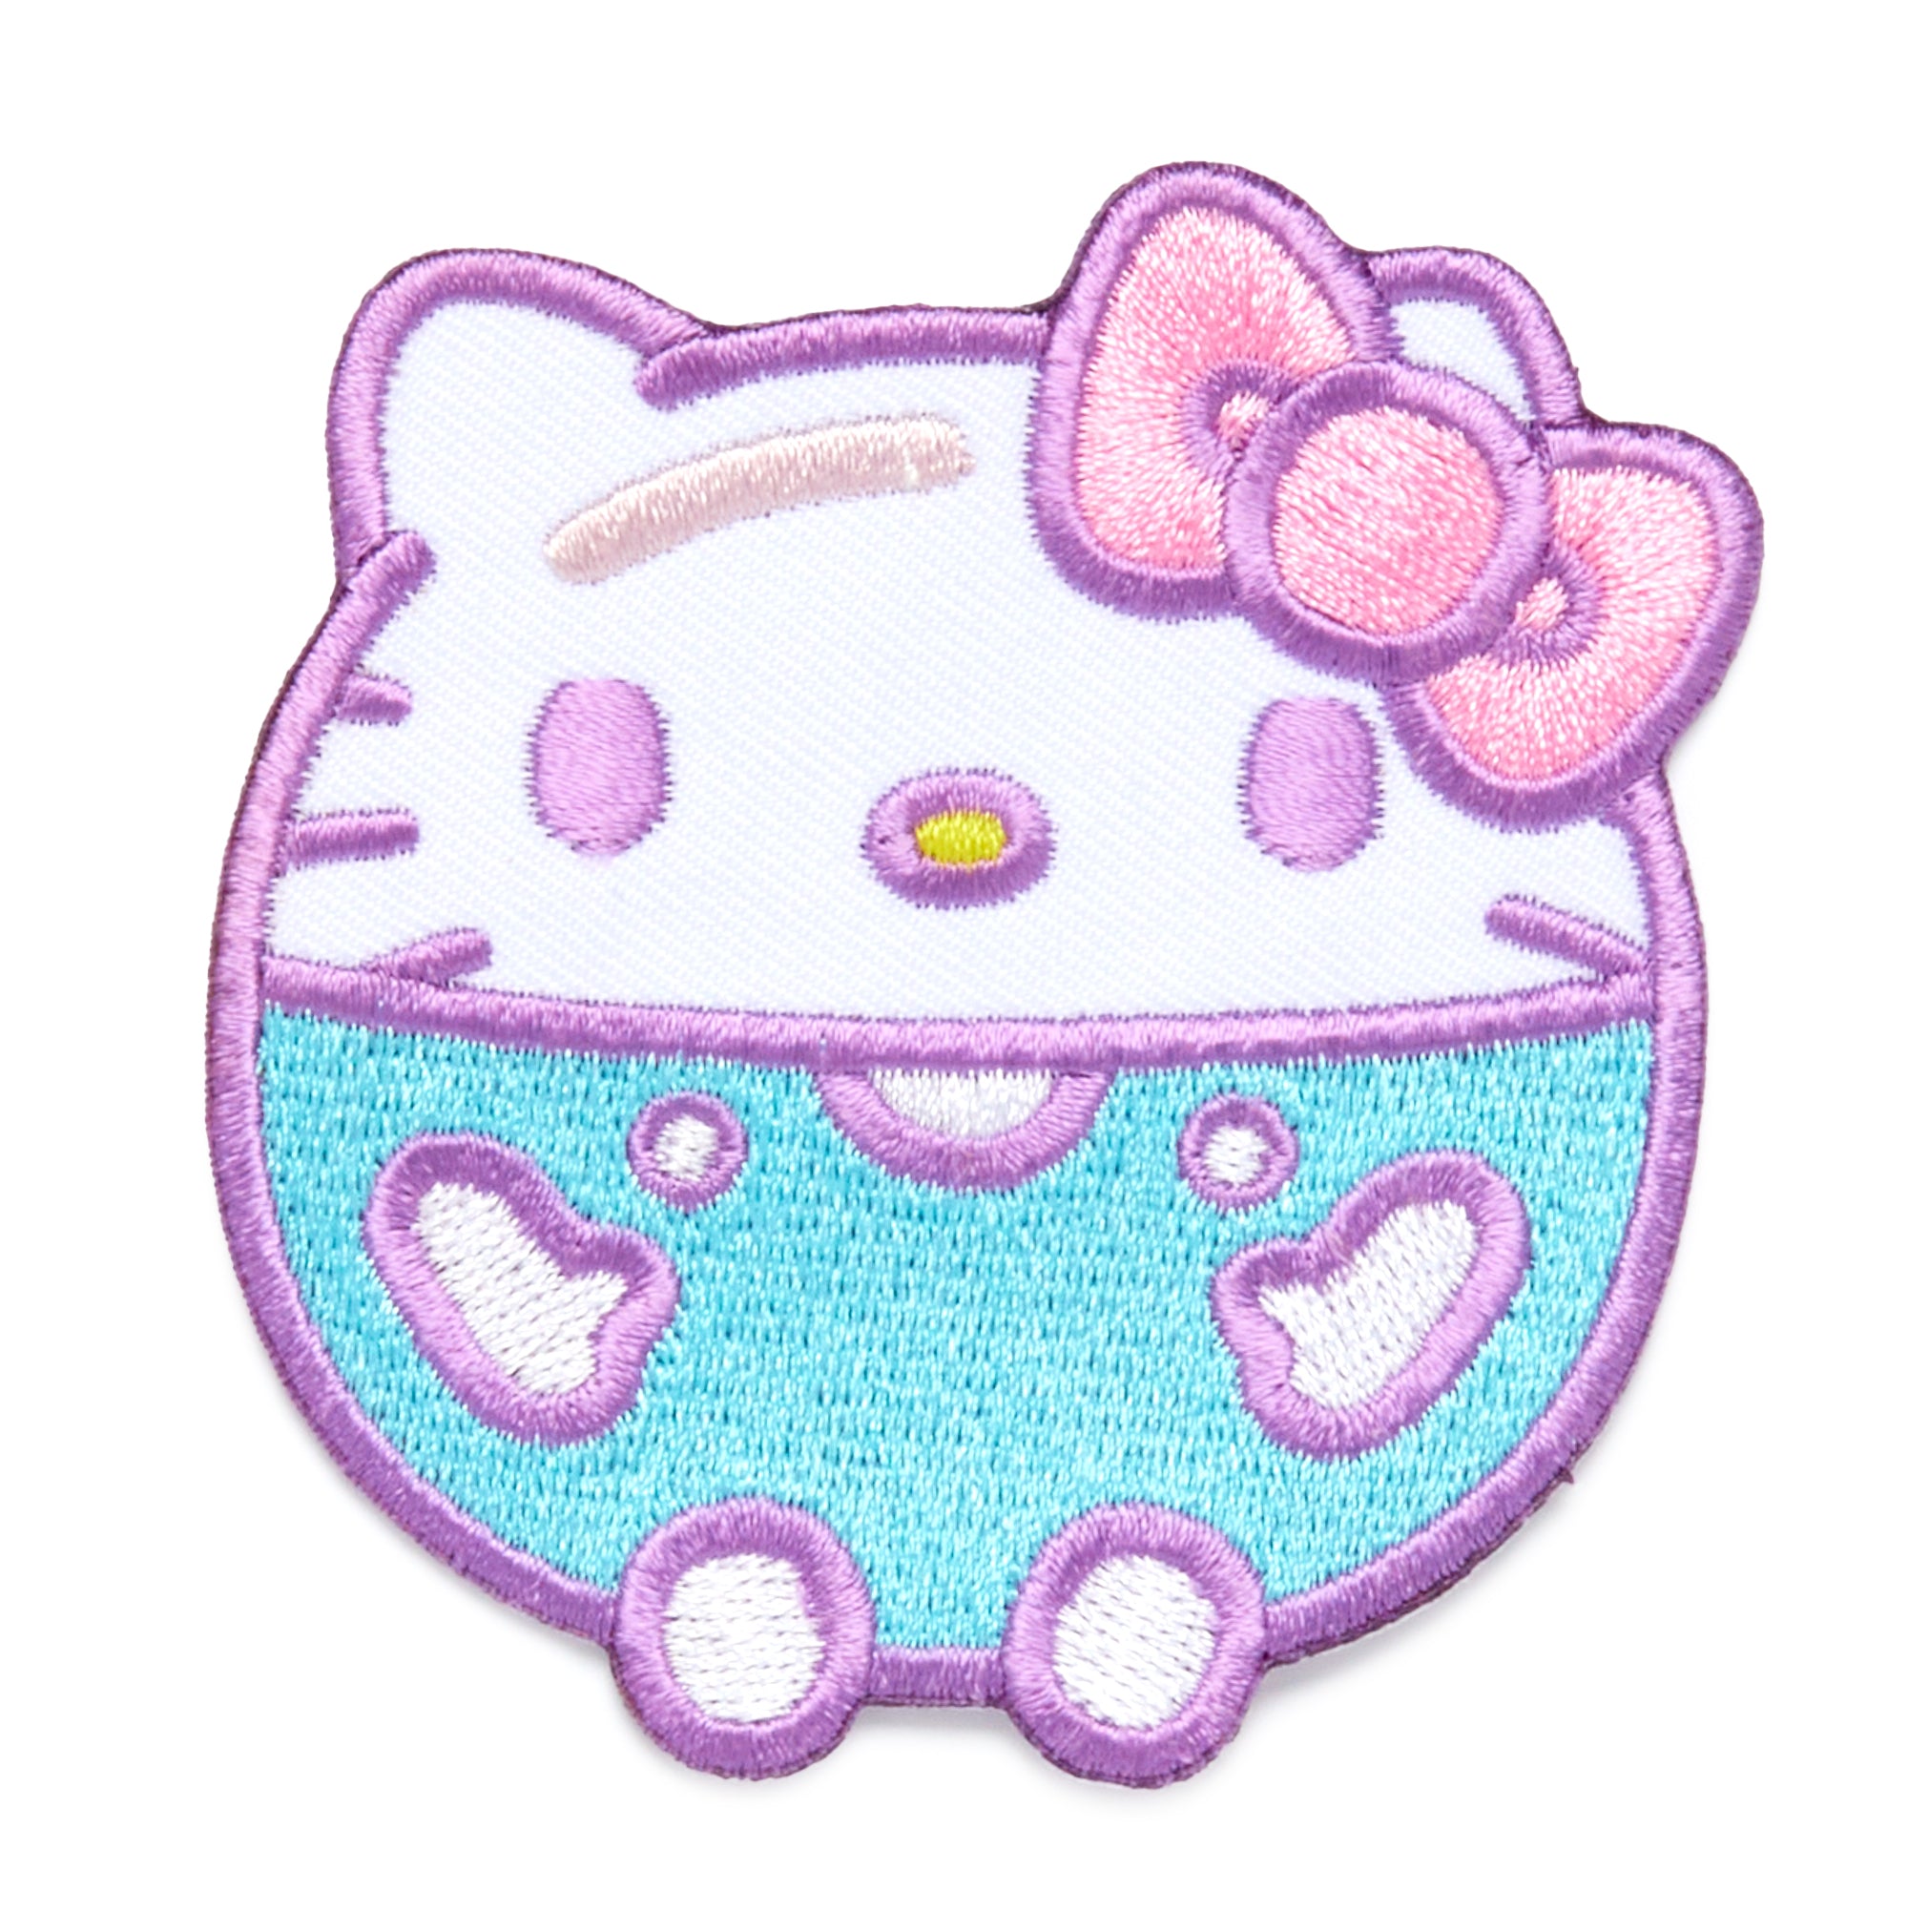 Vintage 2-Packs Hello Kitty Iron on Patches SANRIO SERIES from